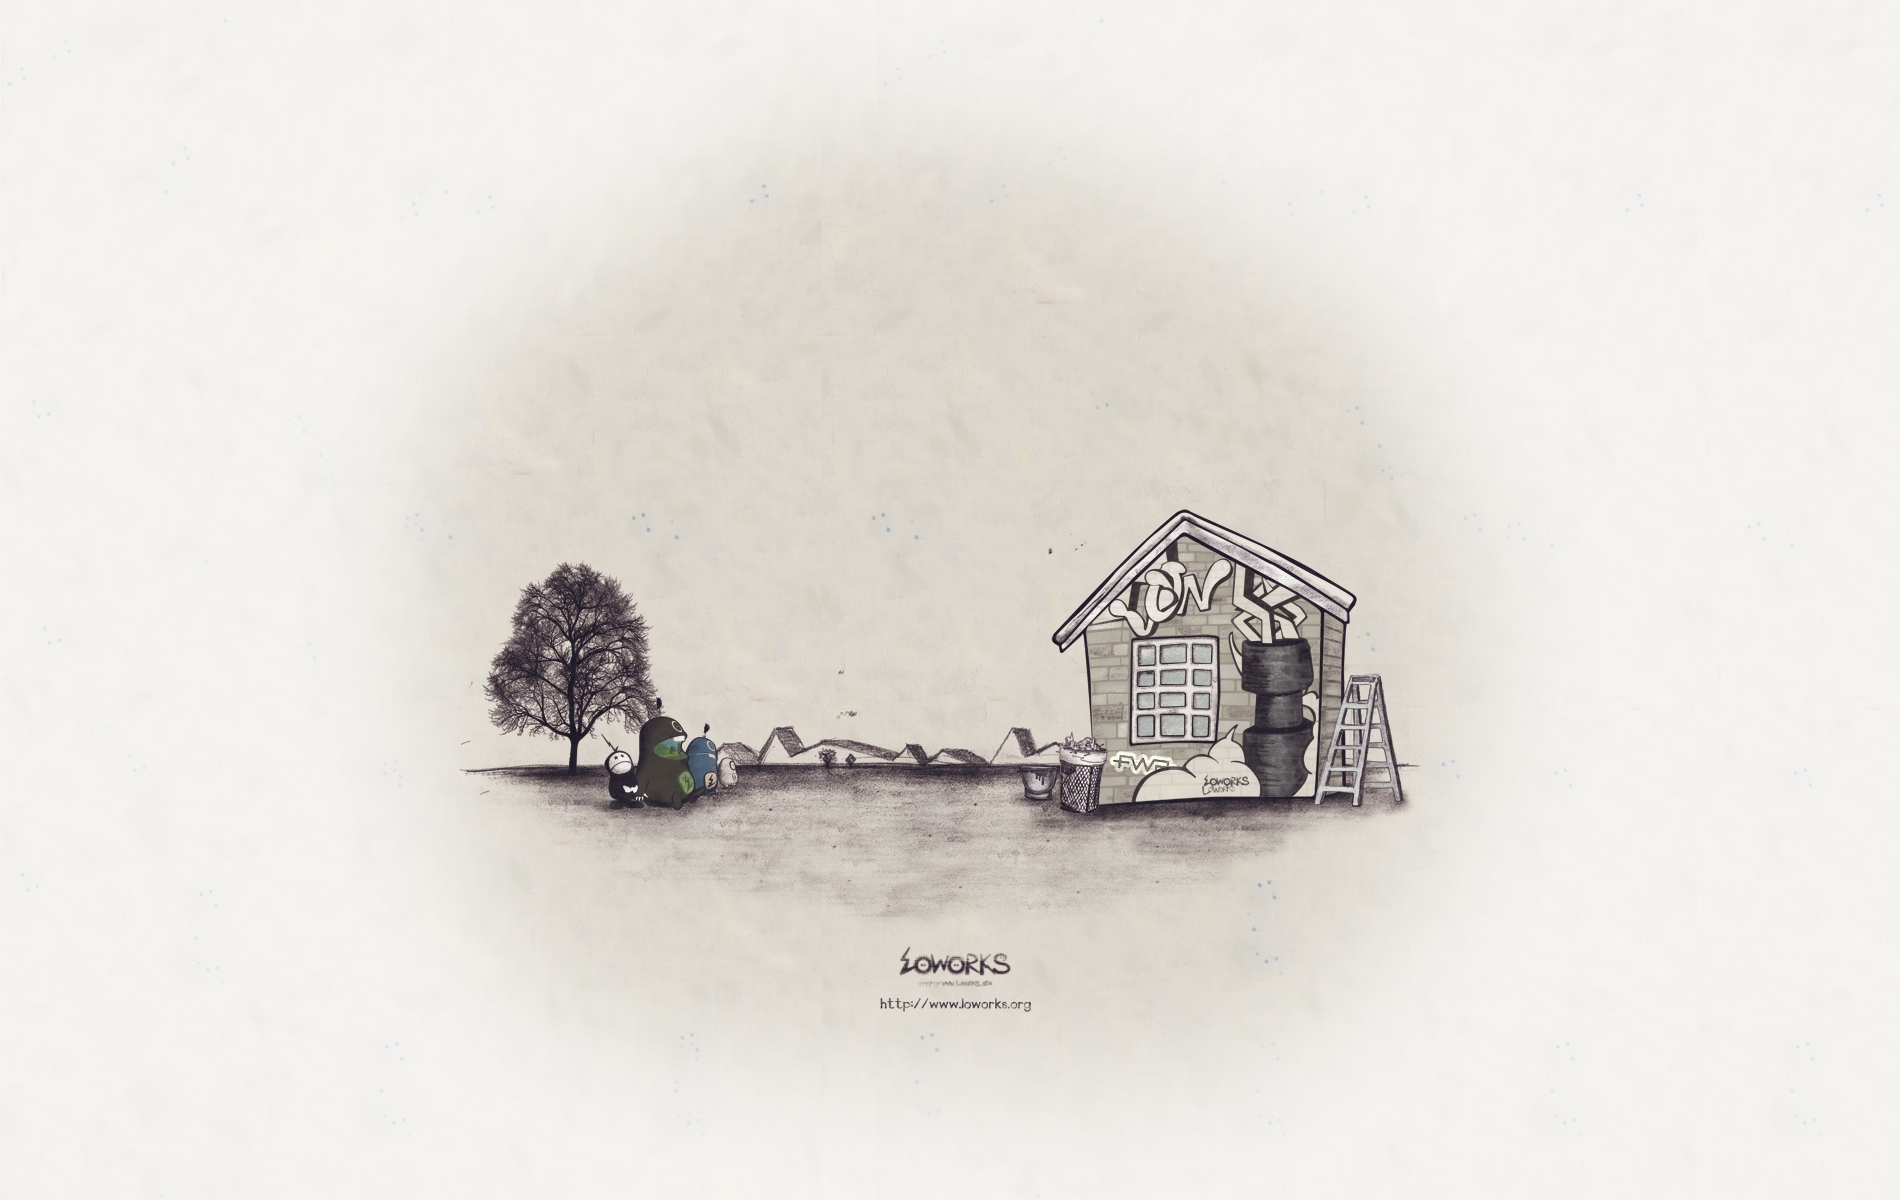 nature, miscellanea, miscellaneous, picture, drawing, house, bw, chb, fwa